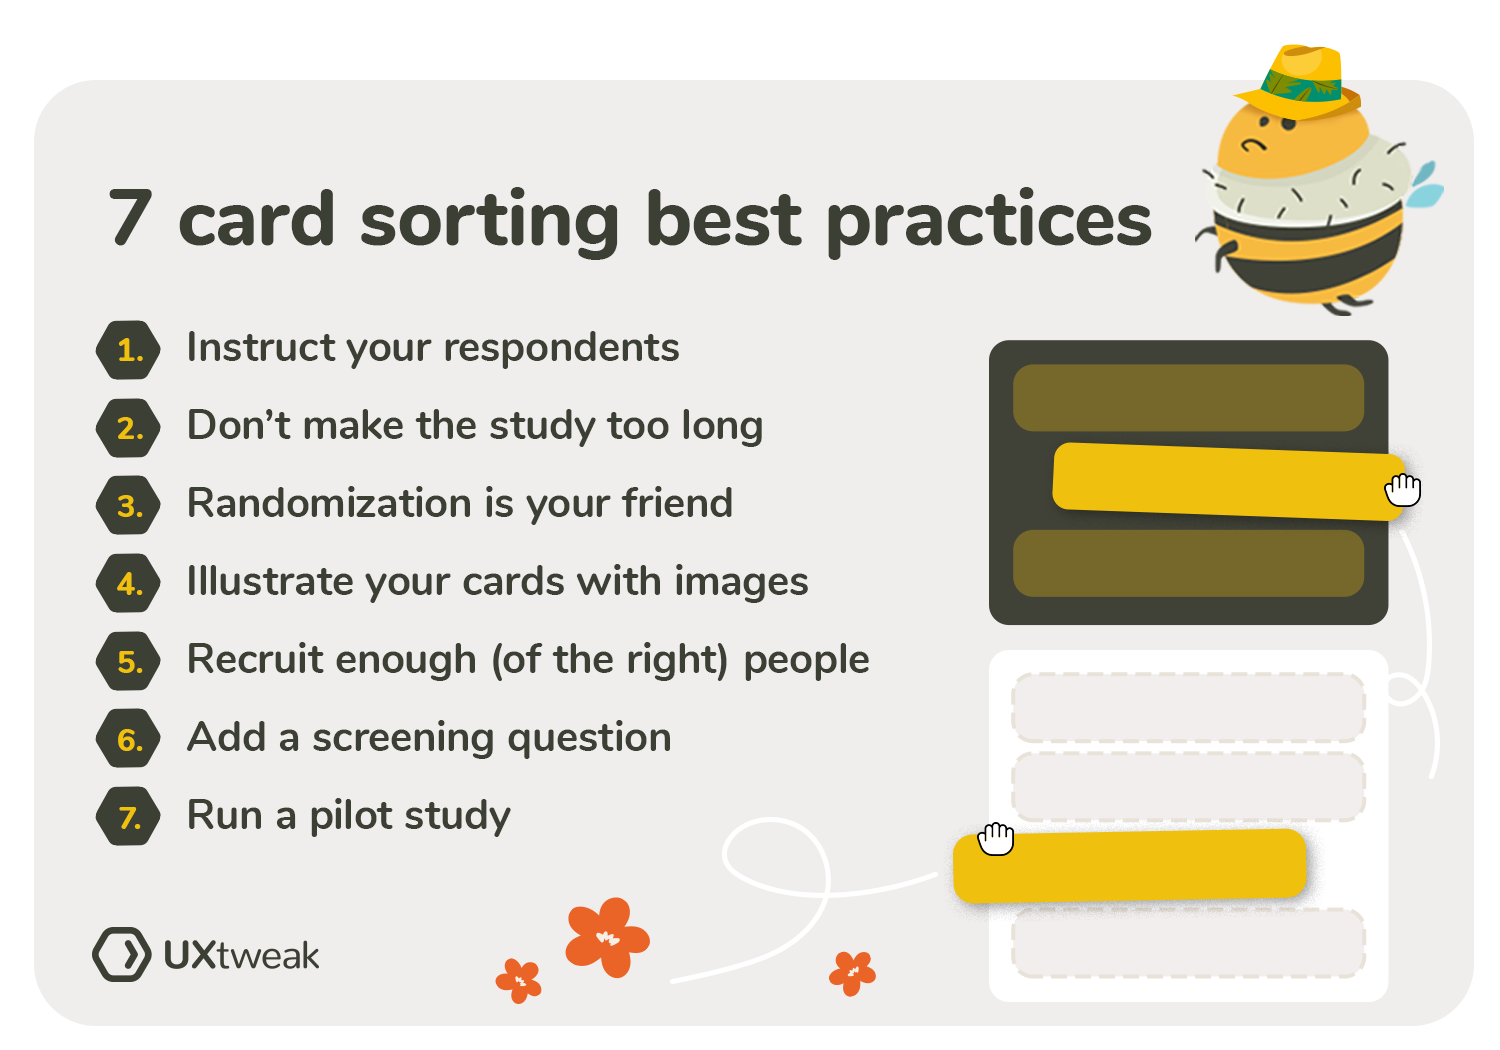 7 card sorting best practices